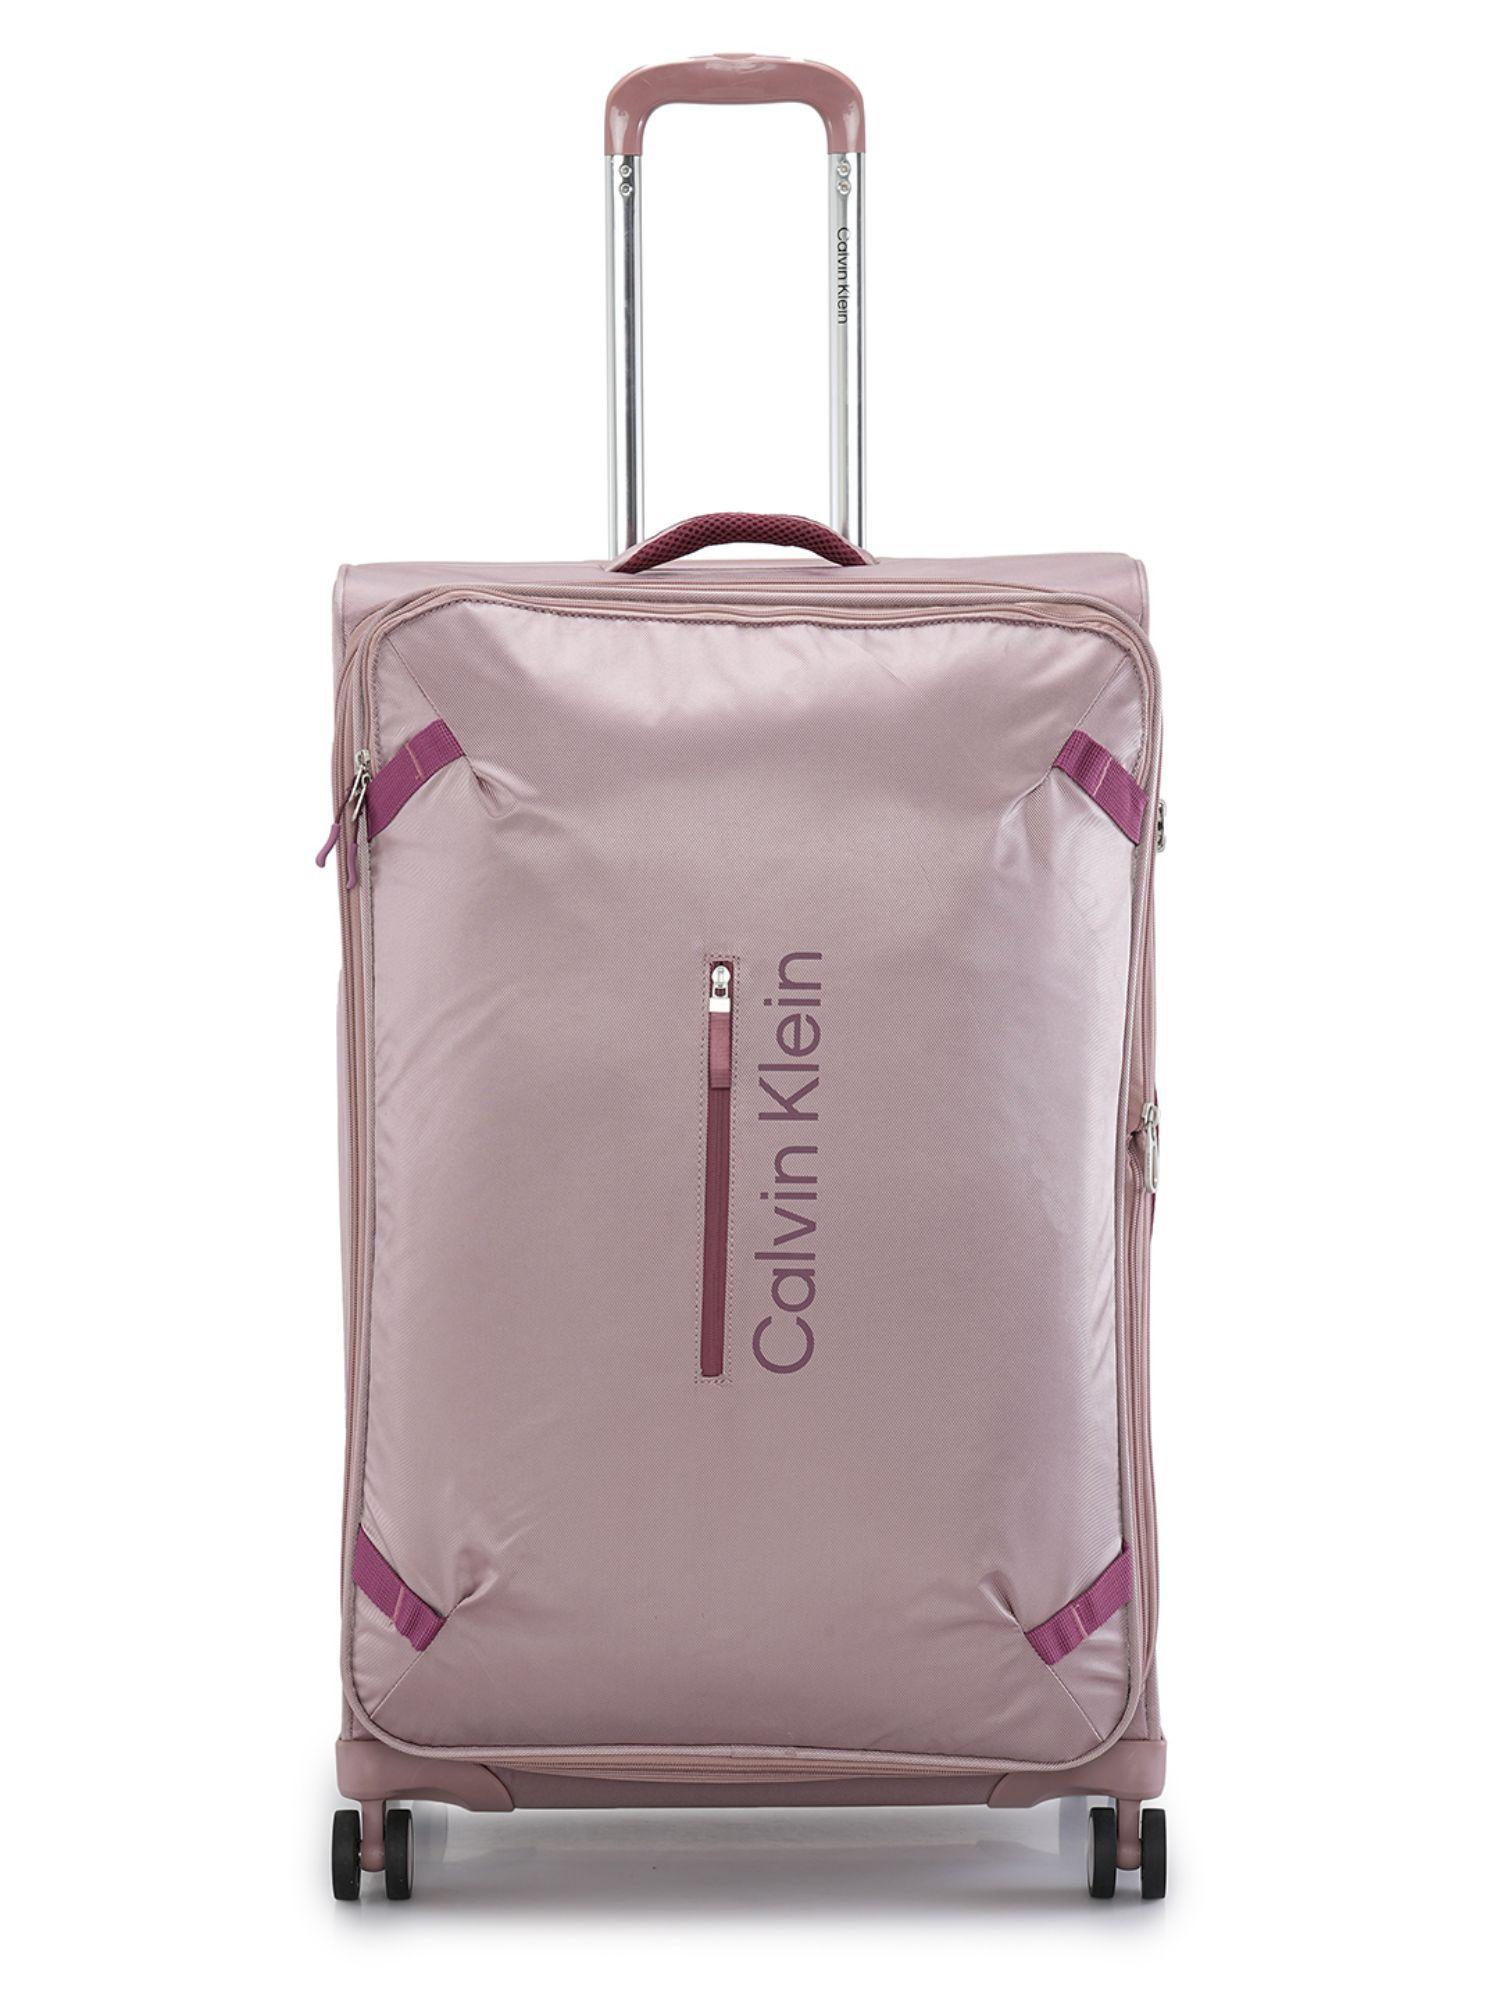 rockaway rose 900d polyester material soft 20 cabin trolley